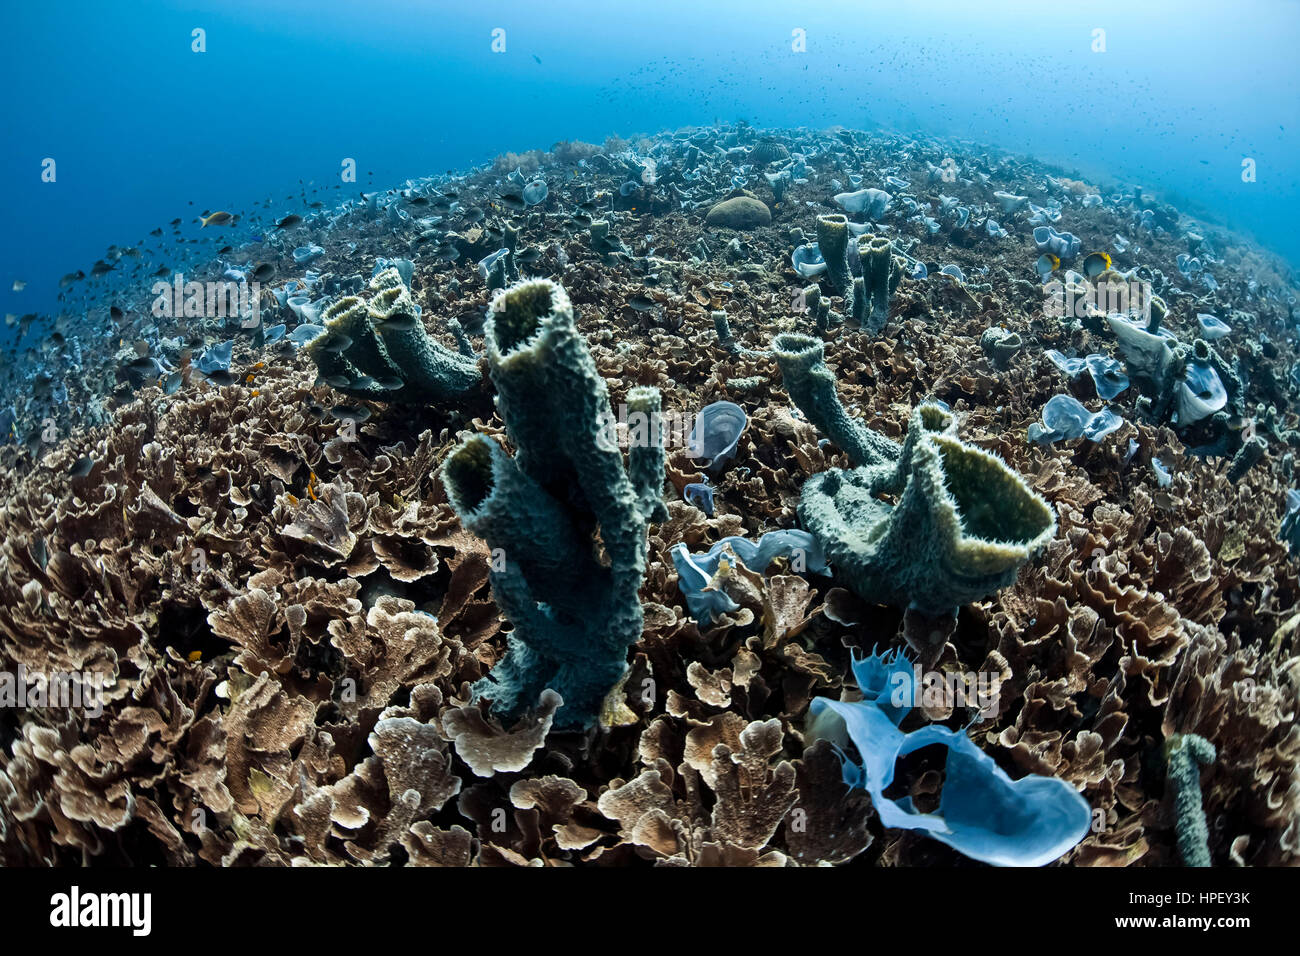 Reef with tube corals, Turbinaria conspicua, and coral reef with blue sponges Callyspongia sp. and Porifera, Bali, Asia, Stock Photo